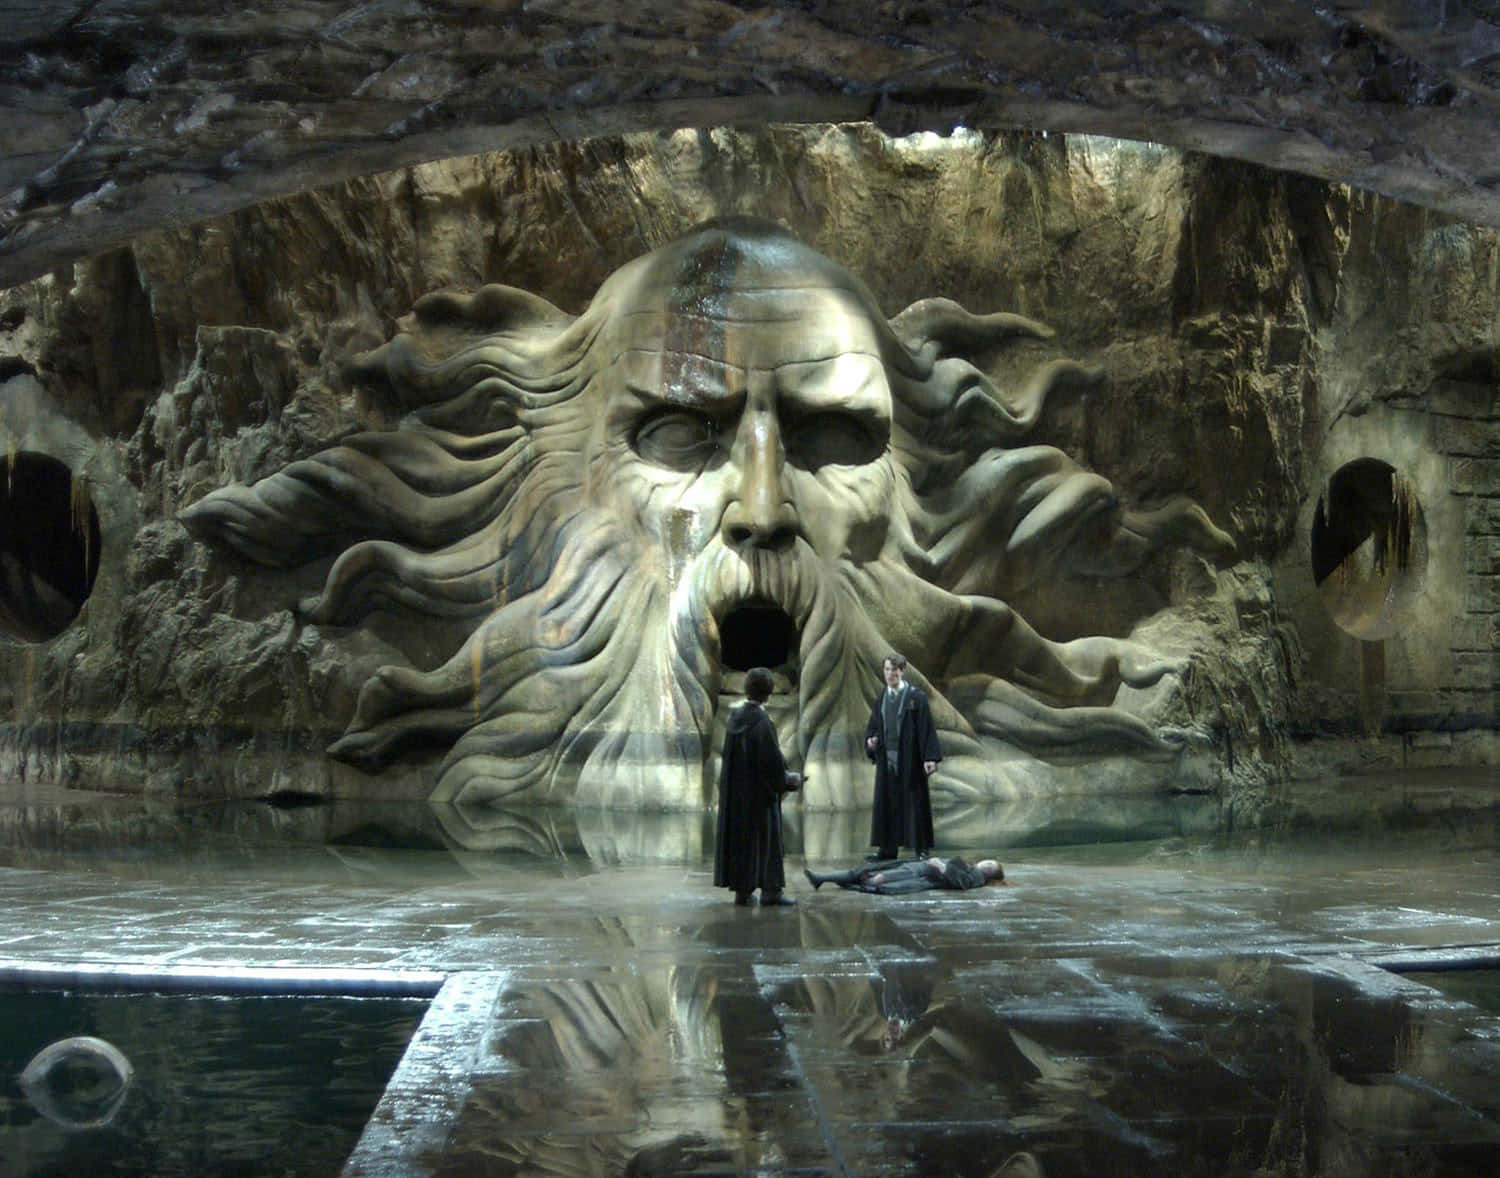 "The Chamber Of Secrets – the only way to uncover its secrets is by entering." Wallpaper